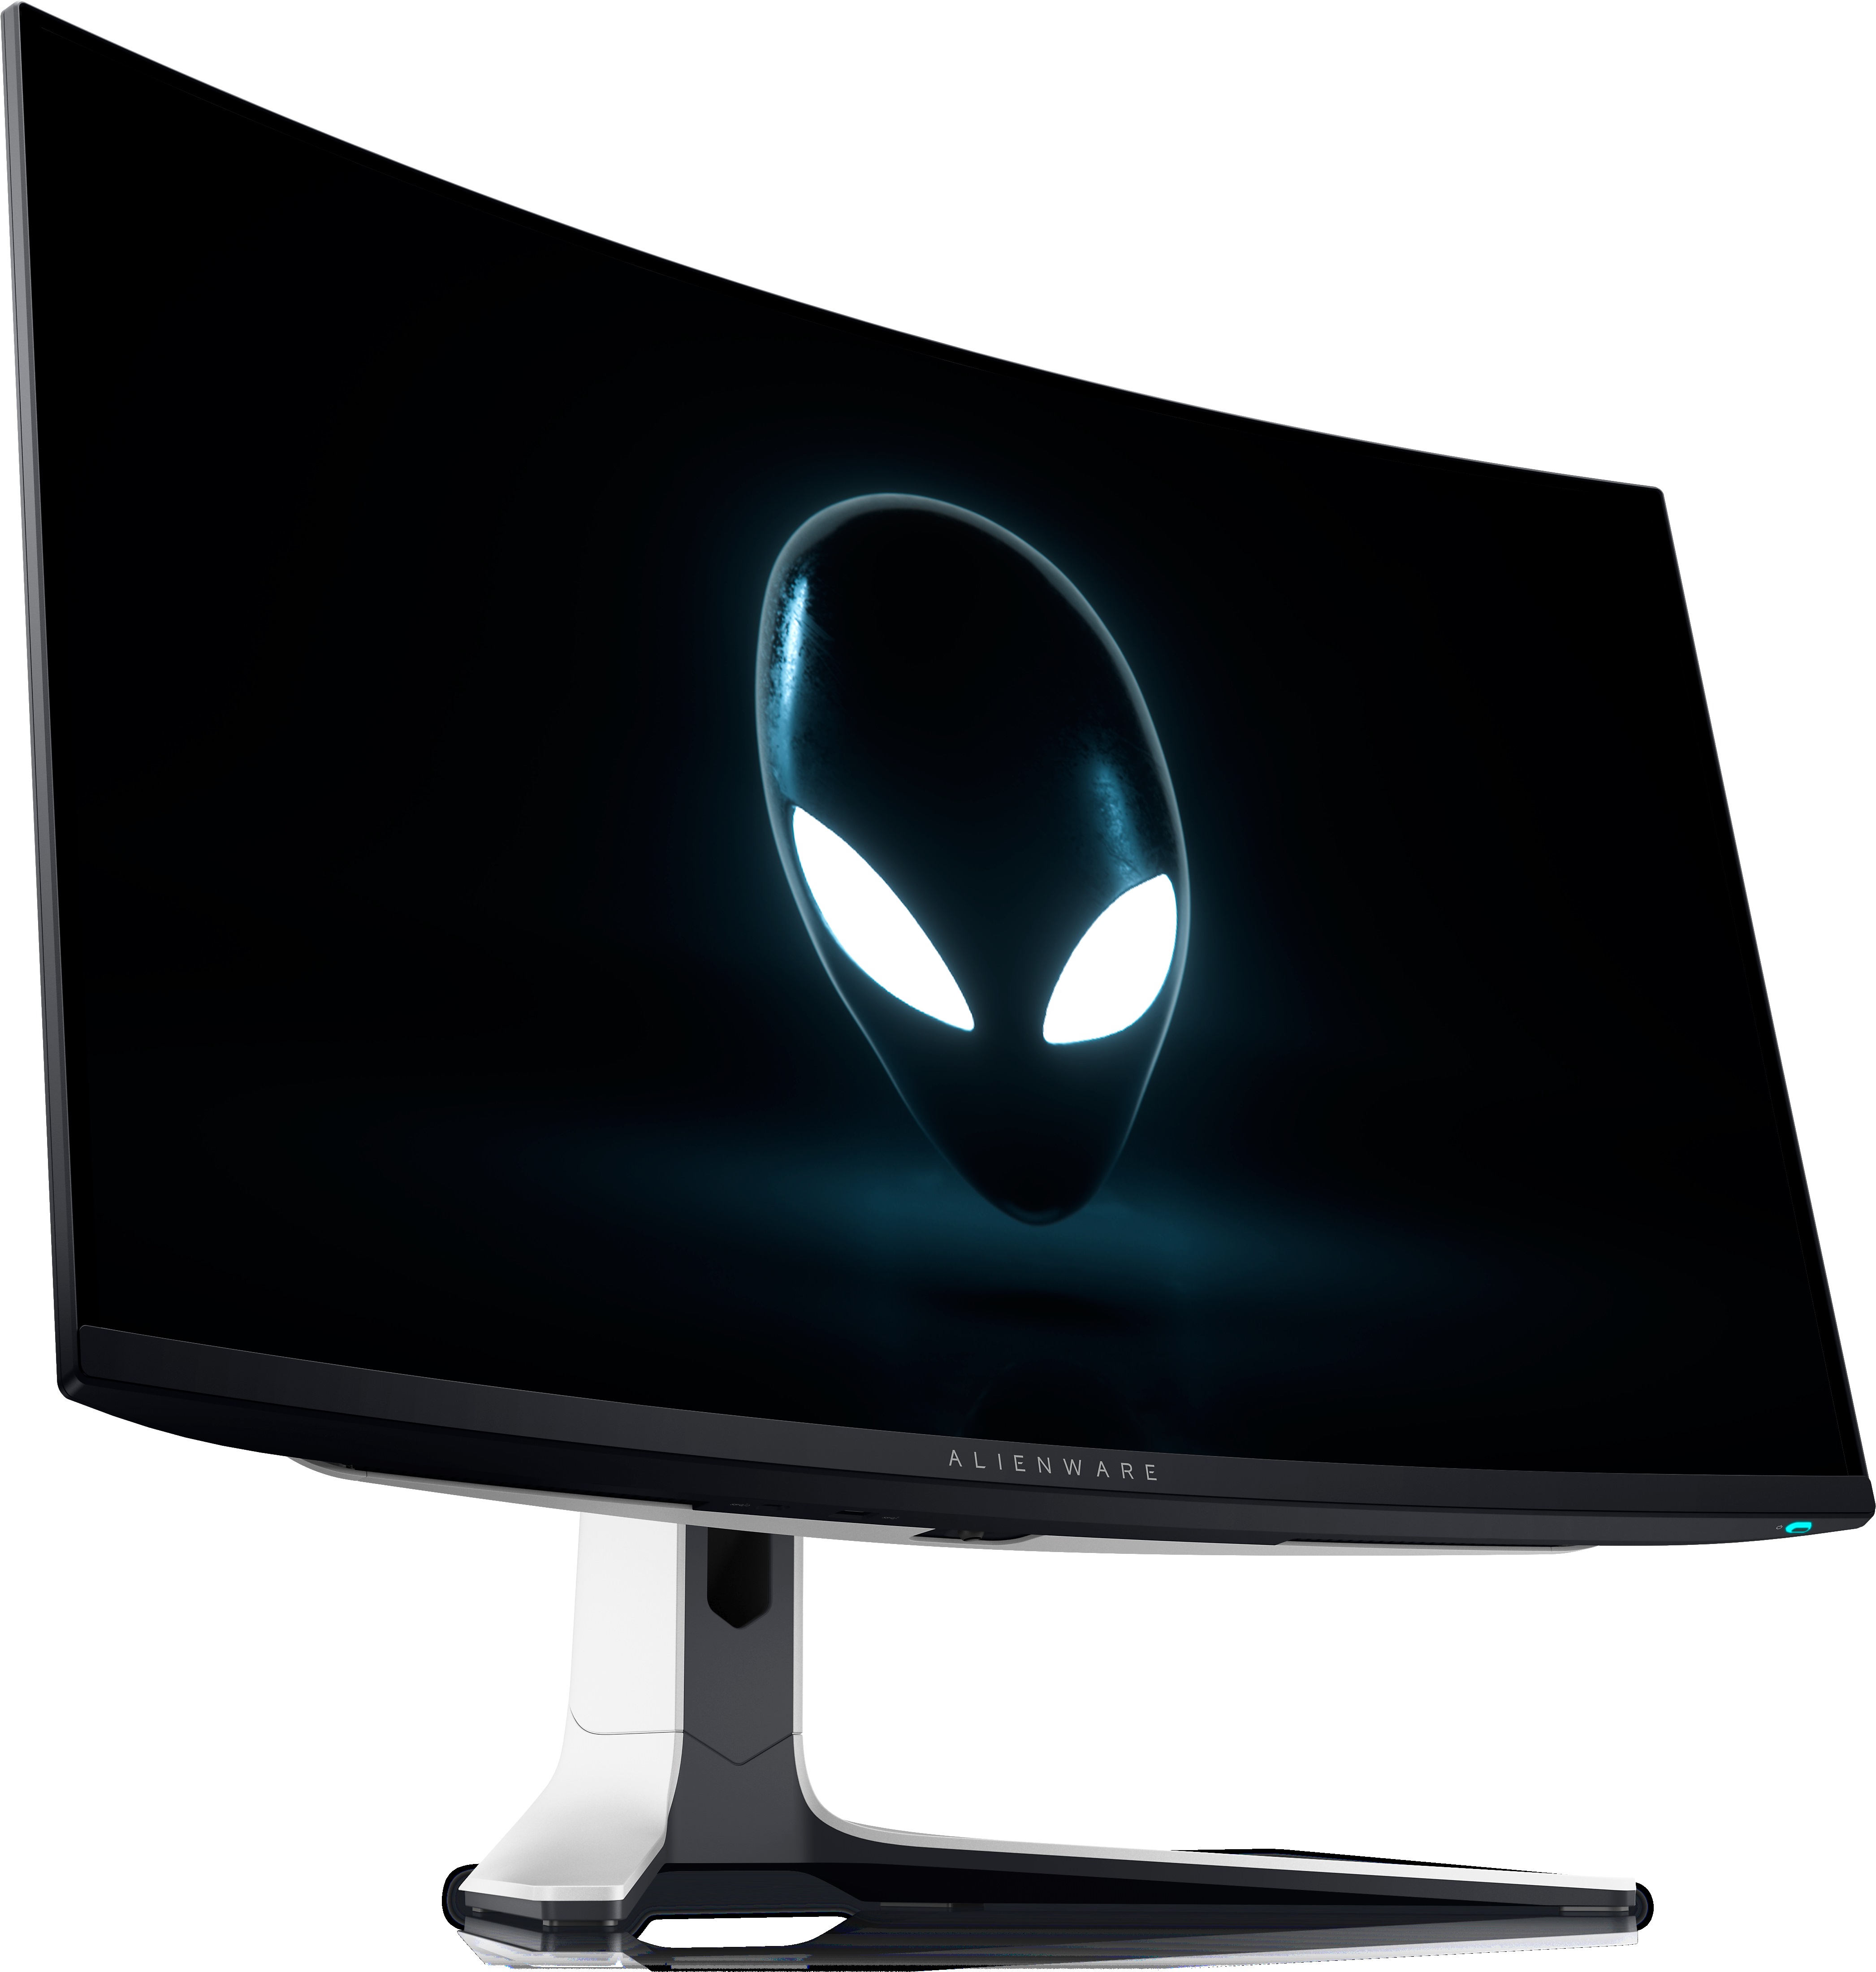 An image of the Alienware AW3225QF QD-OLED gaming monitor showing the Alienware logo on its display. The monitor is being viewed from a front diagonal angle.